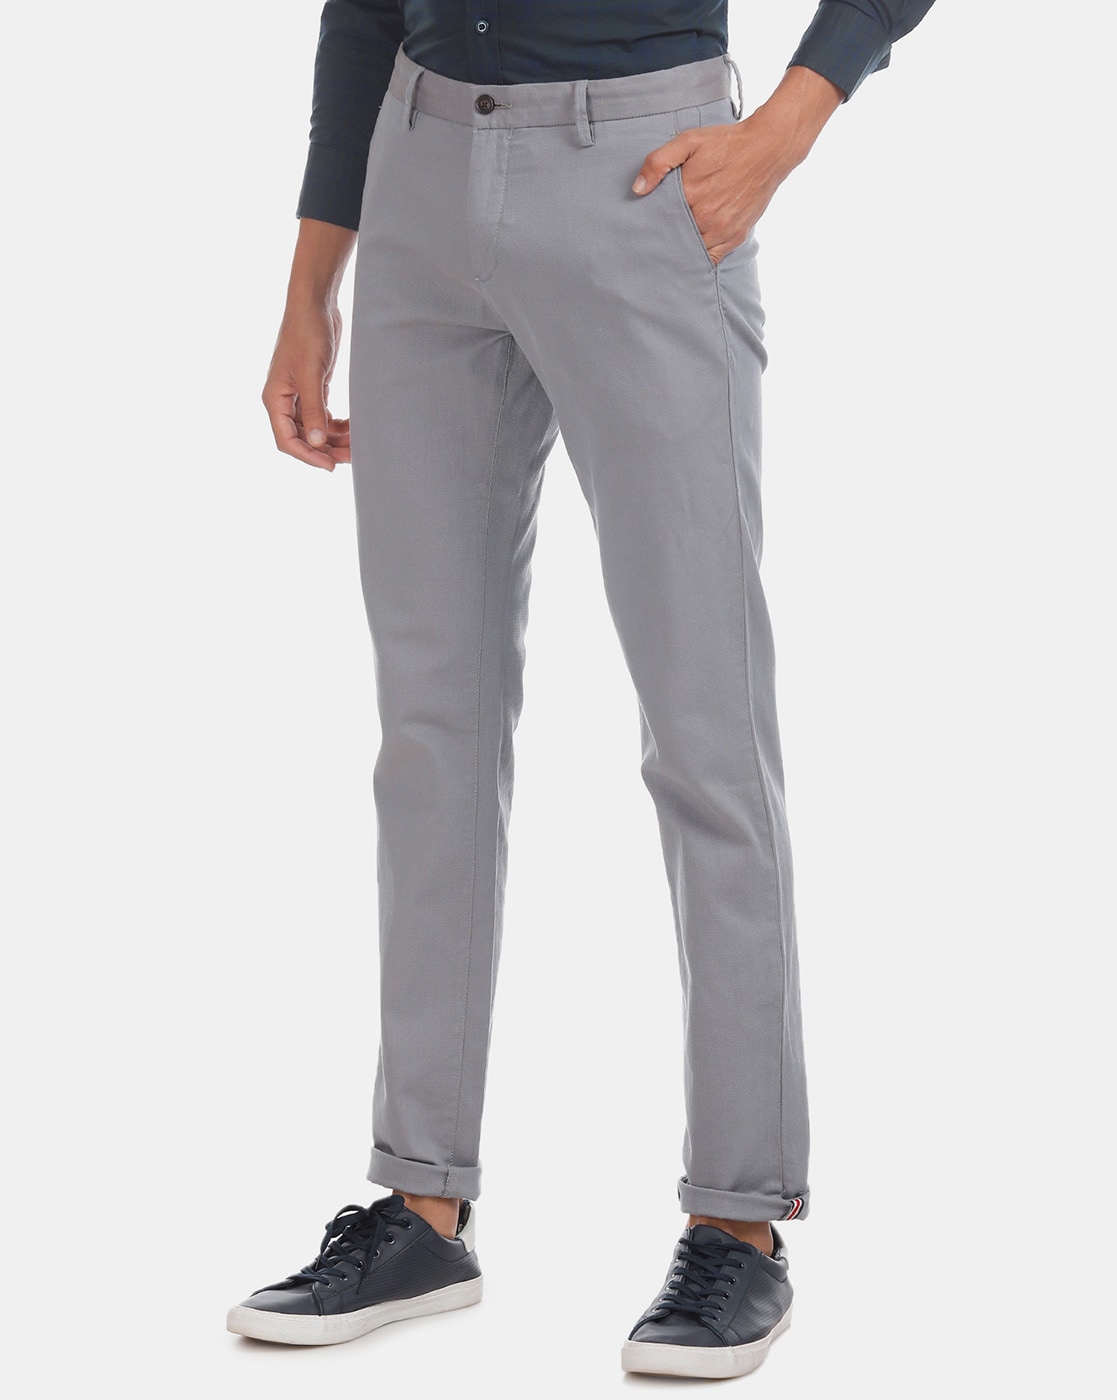 Allen Solly Fit Cotton Checkered Trousers for Men - MountCart